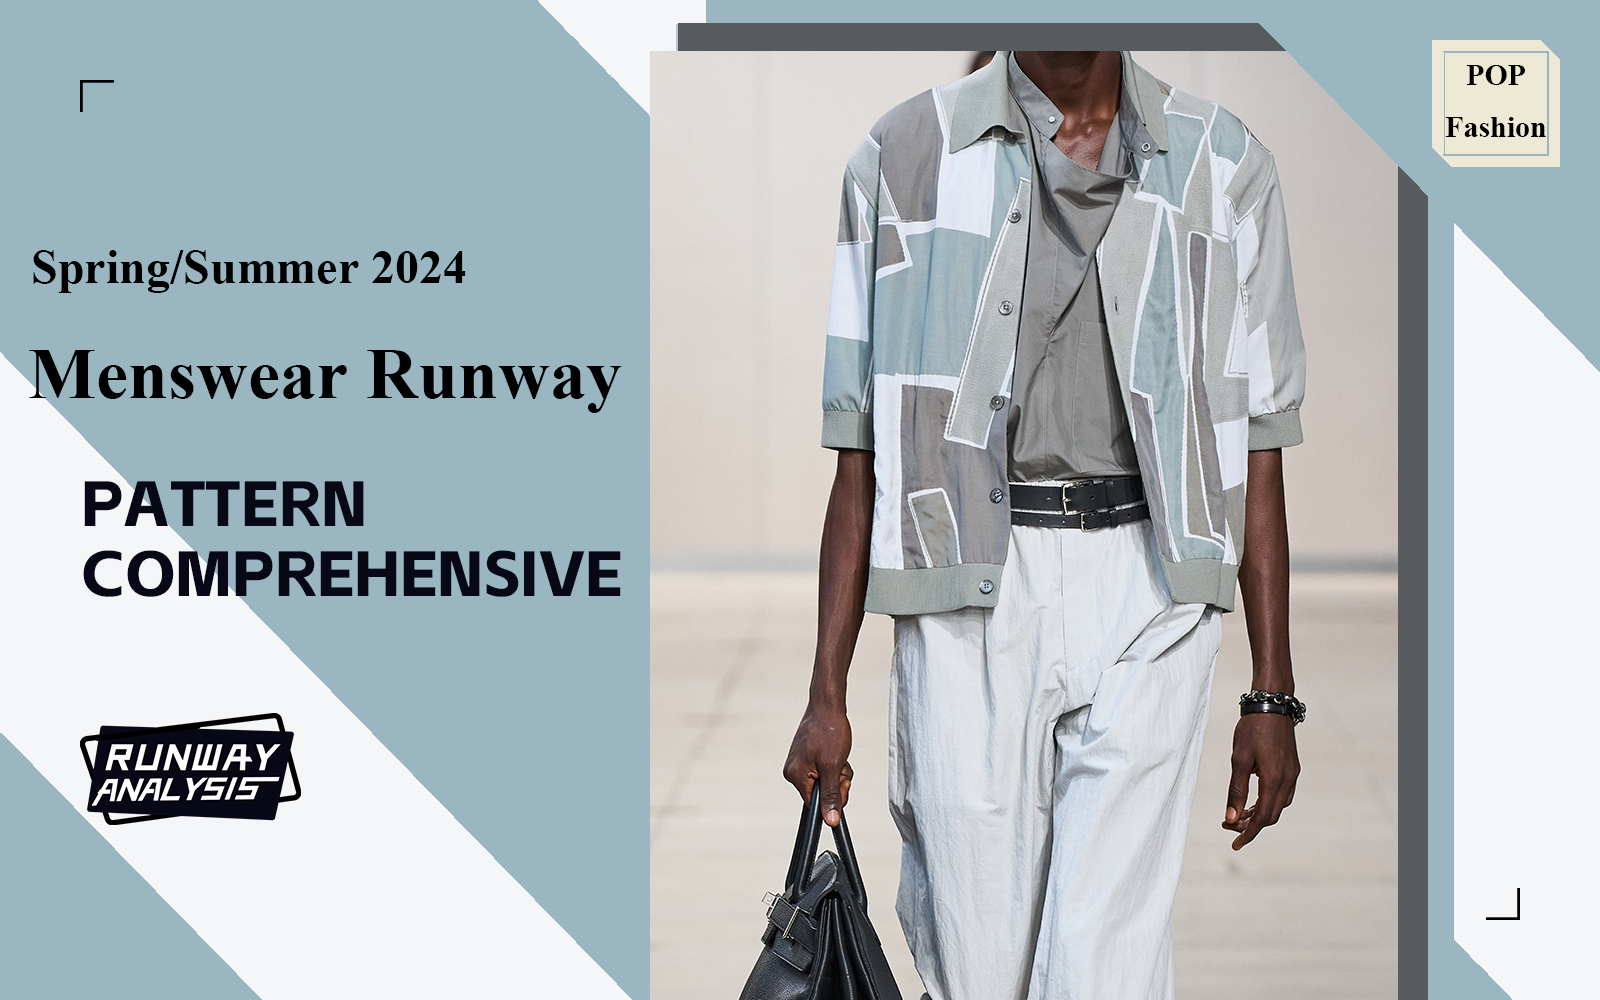 Business Leisure -- The Comprehensive Pattern Analysis of Menswear Runway (Part Three)